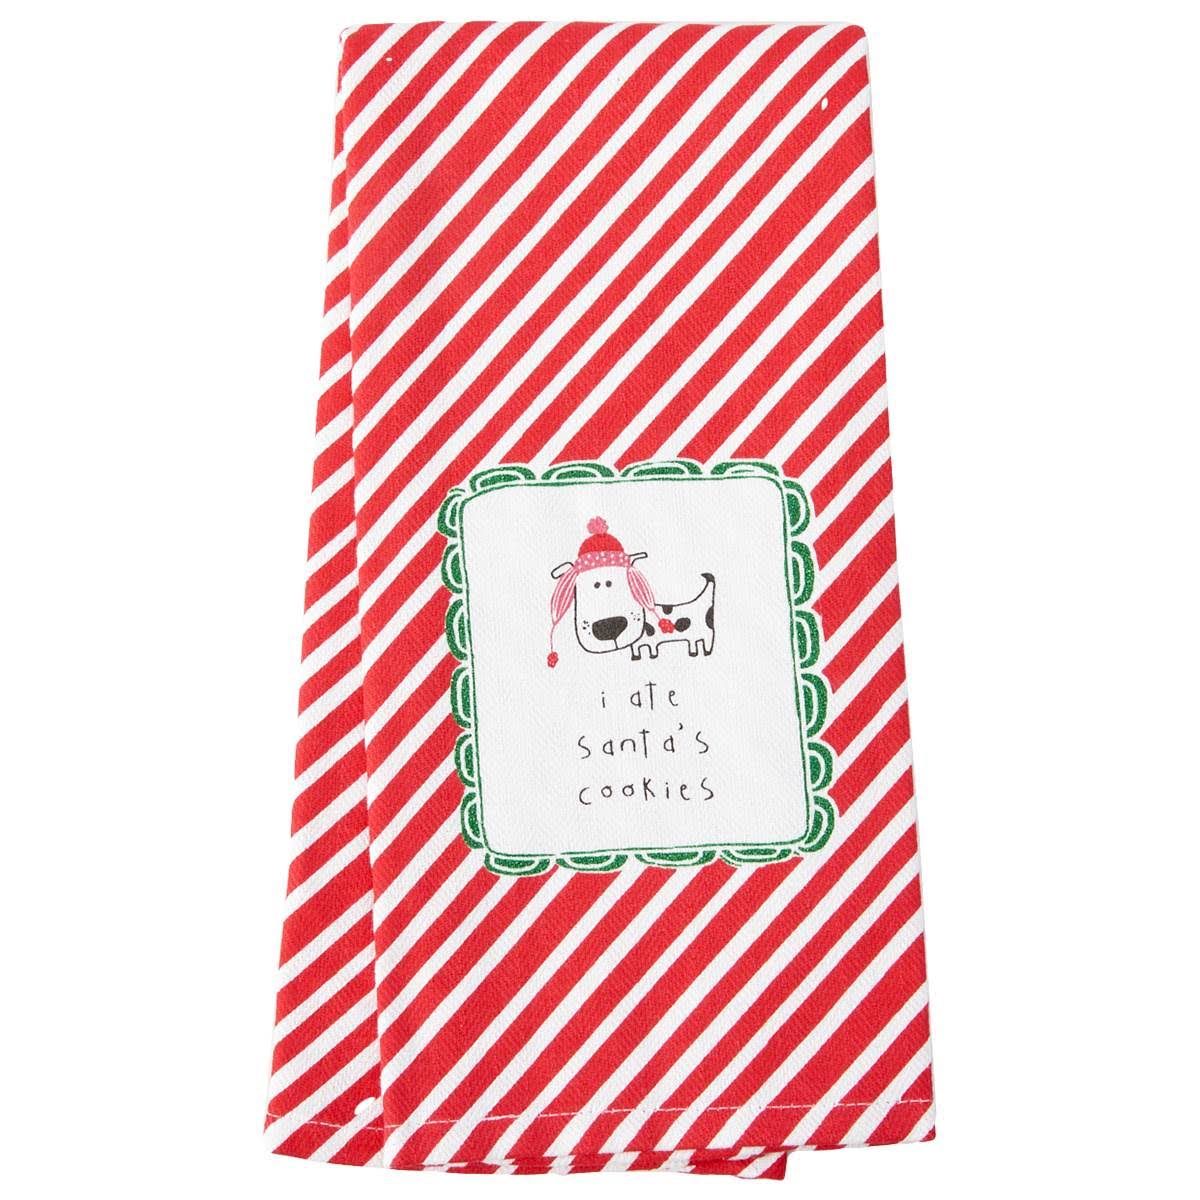 Kay Dee Designs Glitters Santa Cookies Terry Kitchen Towel Red/White | Boscov's